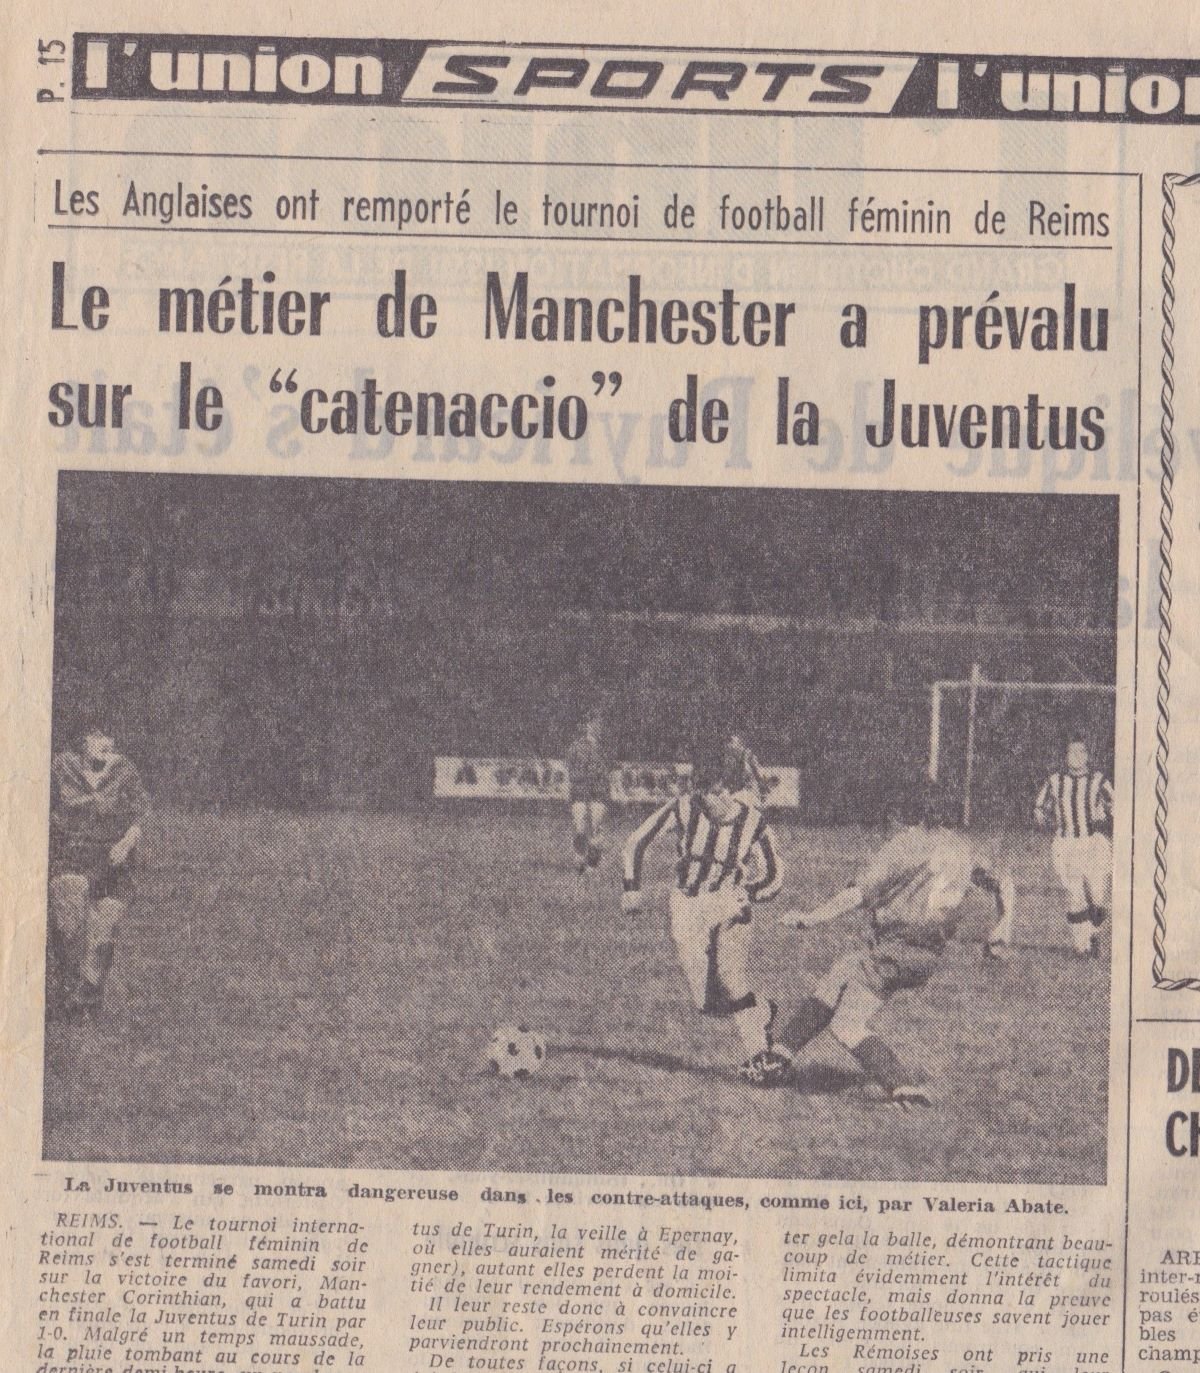 Newspaper coverage of the Reims final in 1970